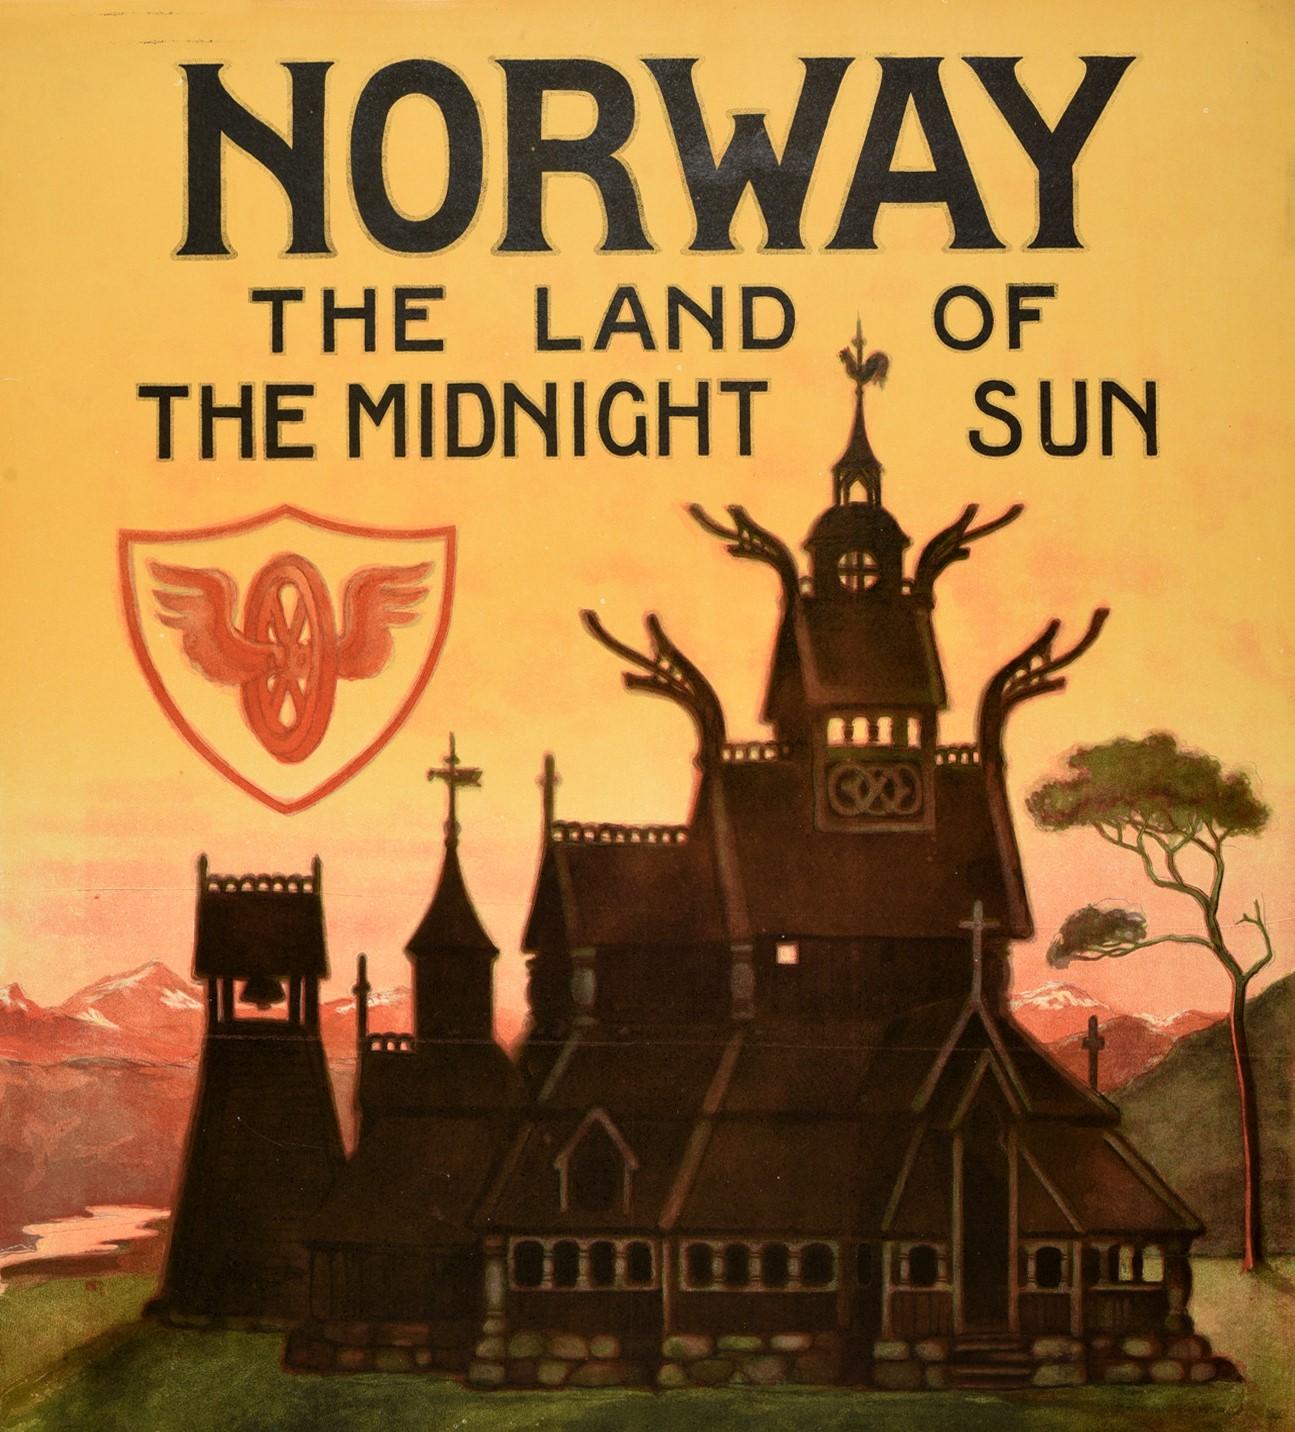 Original antique travel poster for Norway The Land of the Midnight Sun featuring great artwork by Othar Holmboe (1868-1928) depicting a traditional wooden Norwegian Stavkirke church with snow topped mountains in the background, a tree on the side